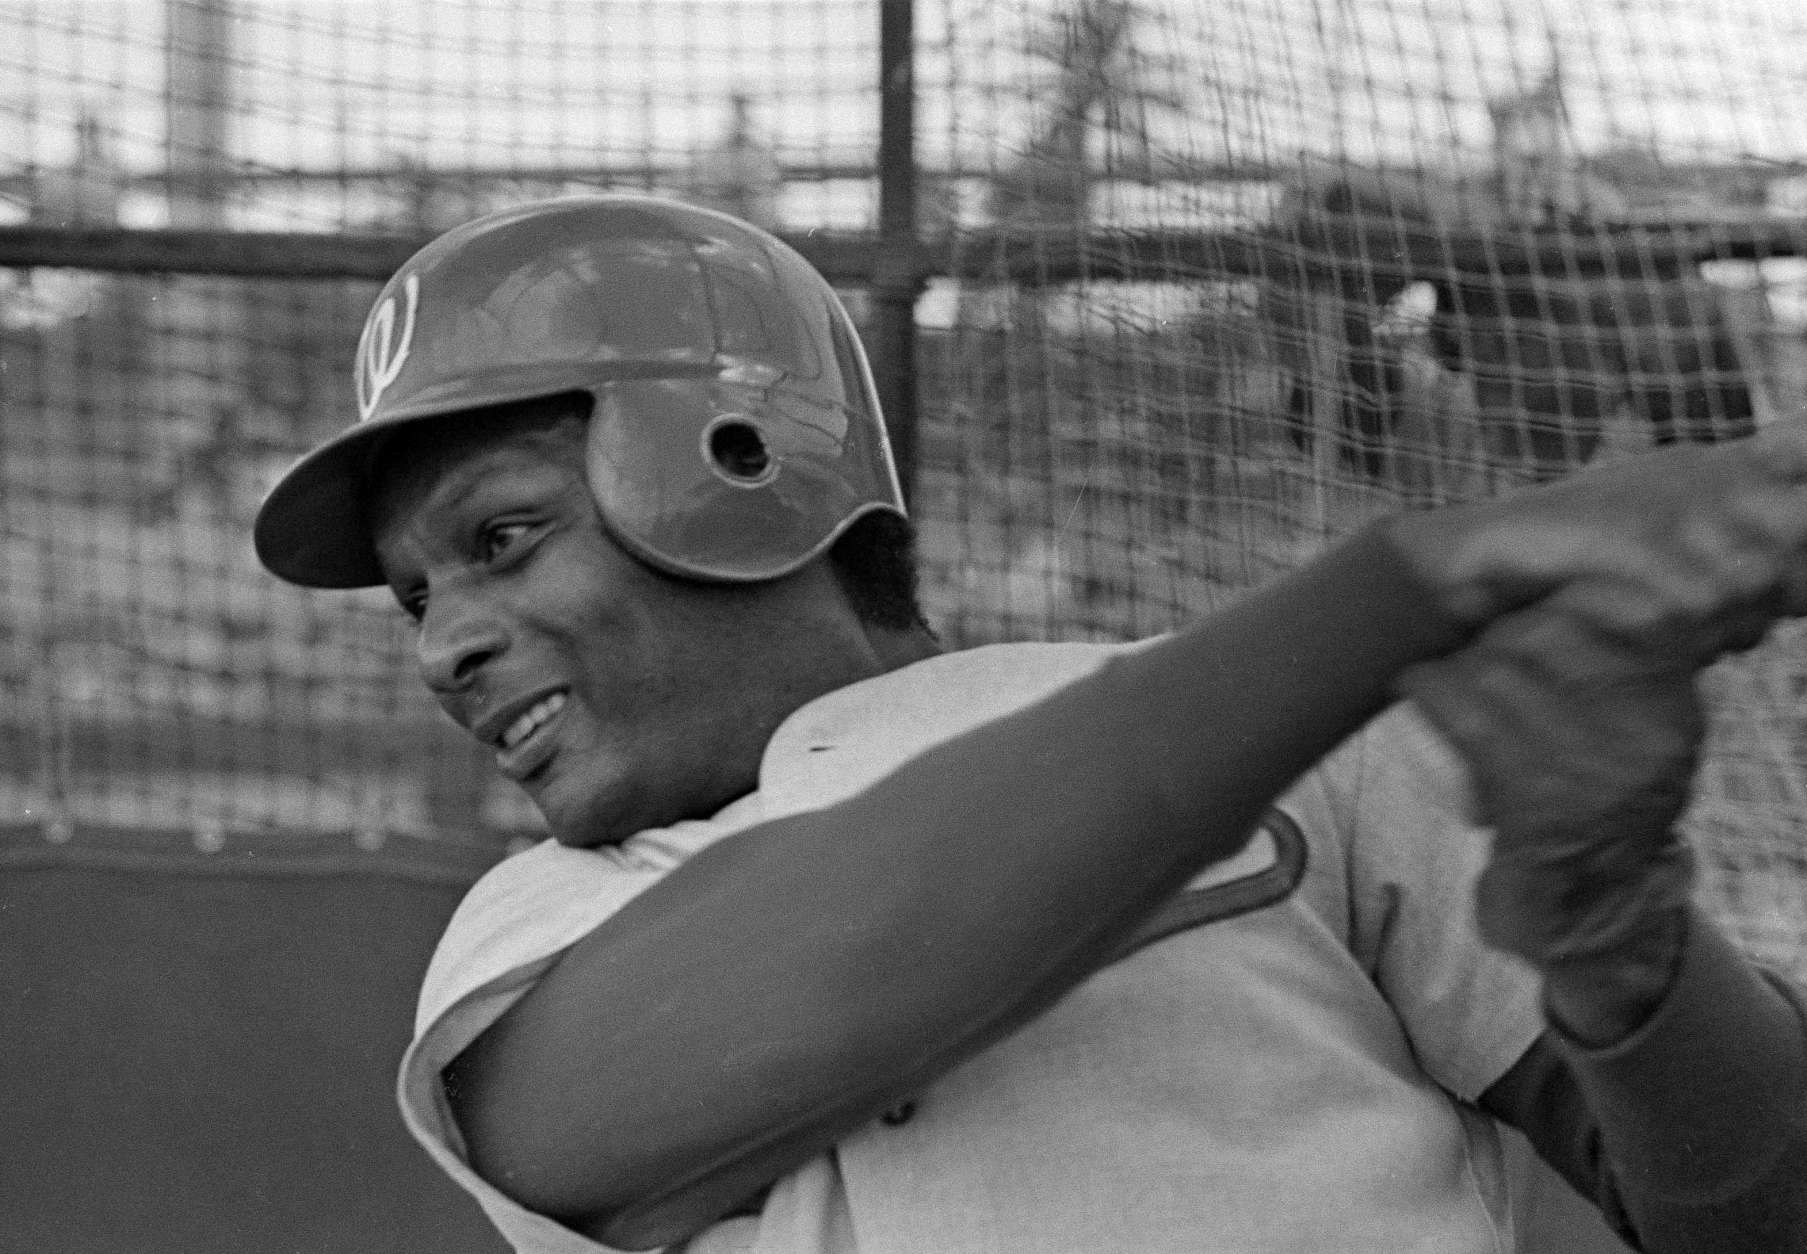 Curt Flood, who recently joined the Washington Senators after a year's absence from baseball, has a turn in the batting cage at the team's spring training camp in Pompano Beach, Fla., Feb. 23, 1971. (AP Photo/Robert Houston)